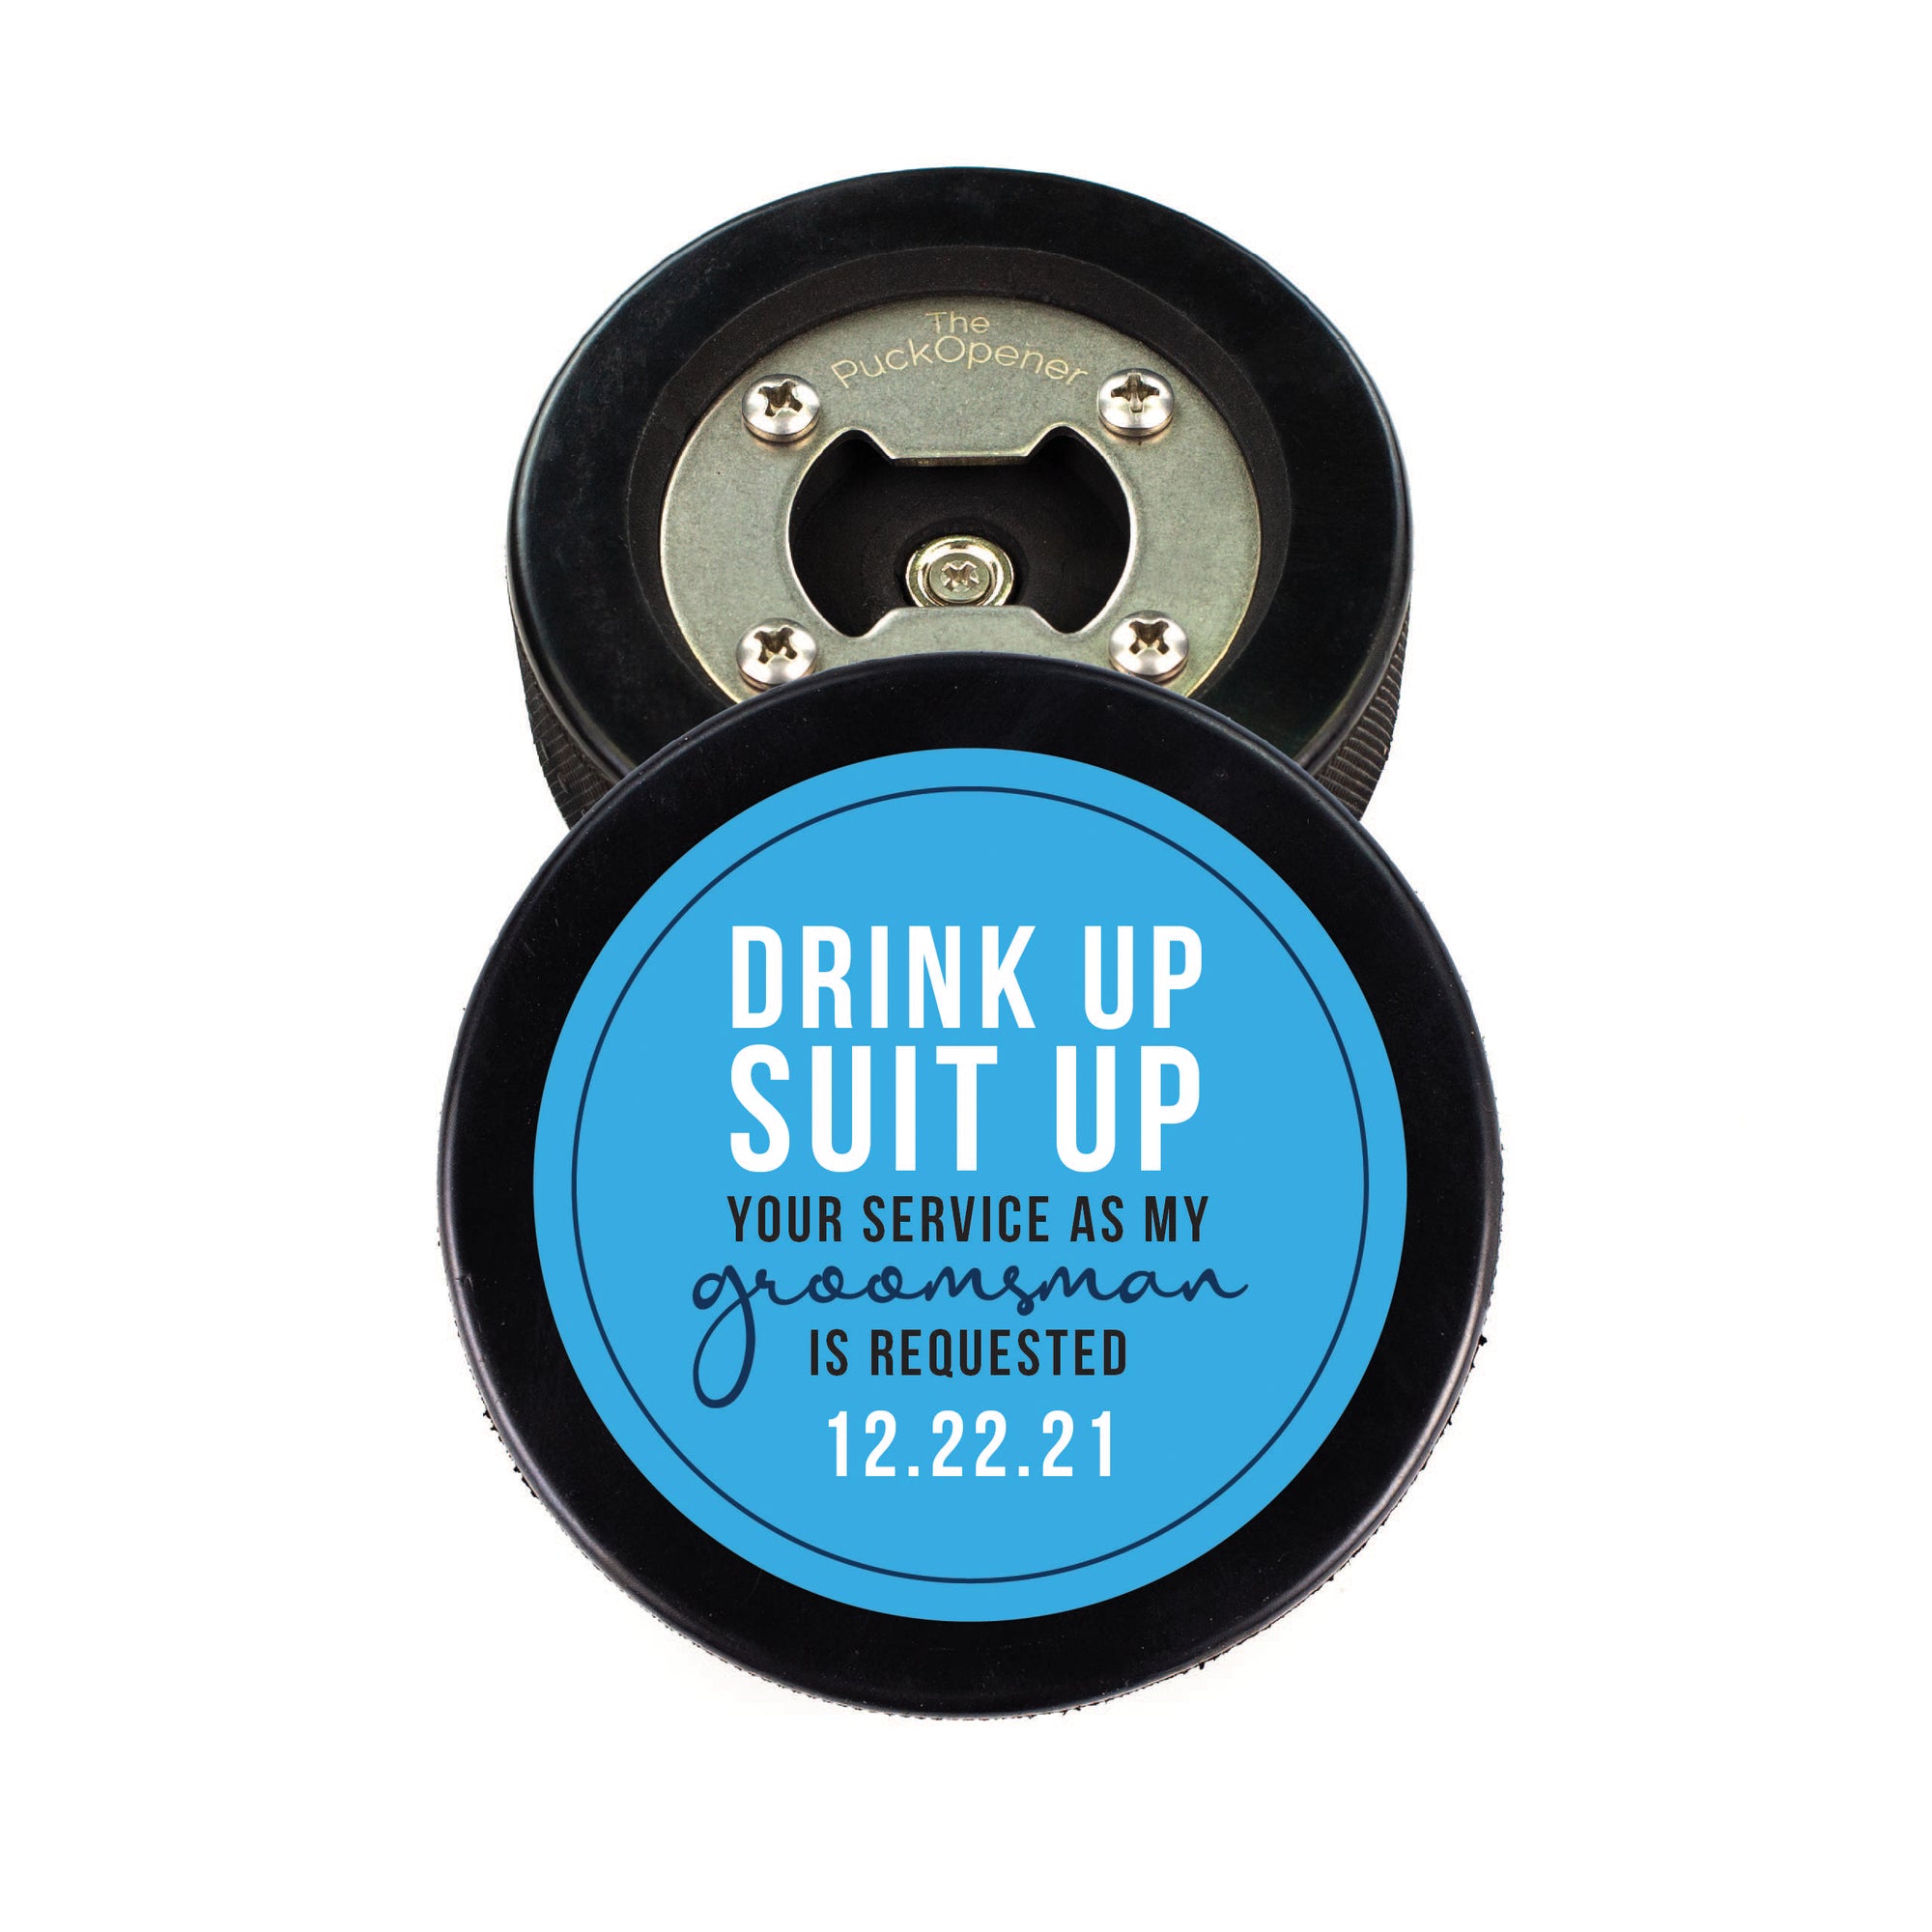 Hockey Puck Bottle Opener with Drink Up Suit Up Personalization Text Design